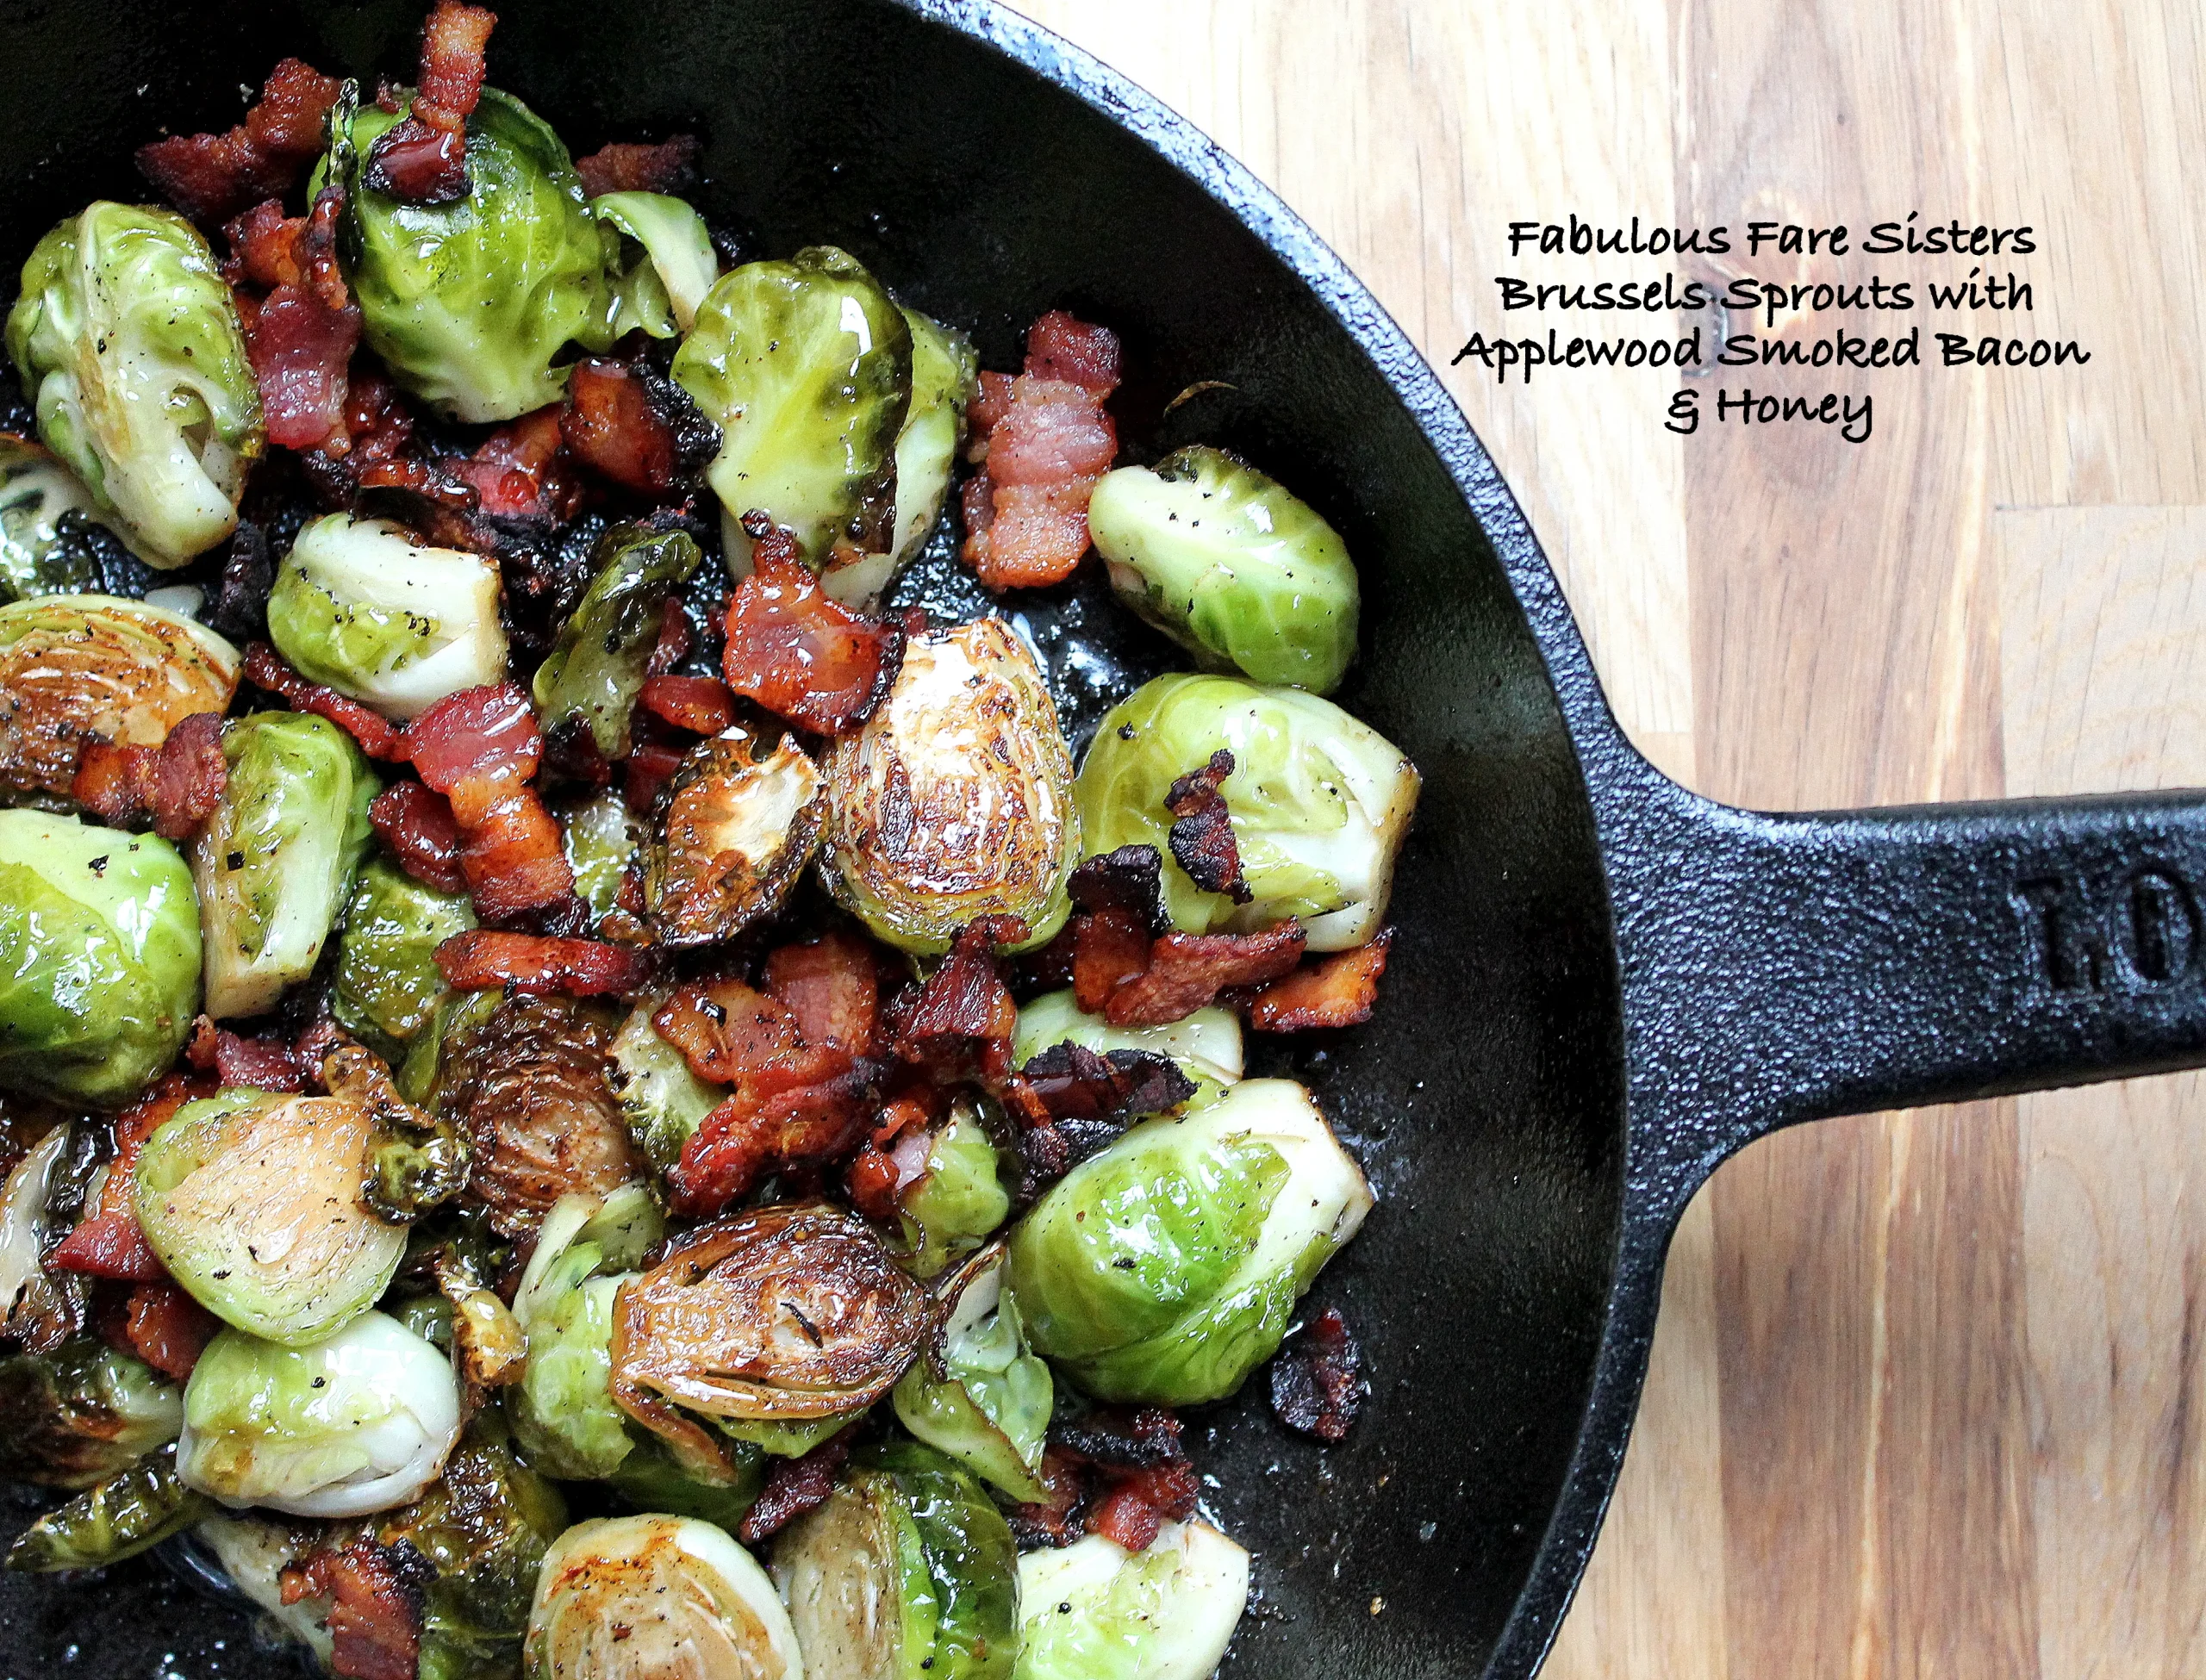 smoked bacon brussel sprouts - What does soaking brussel sprouts in water do